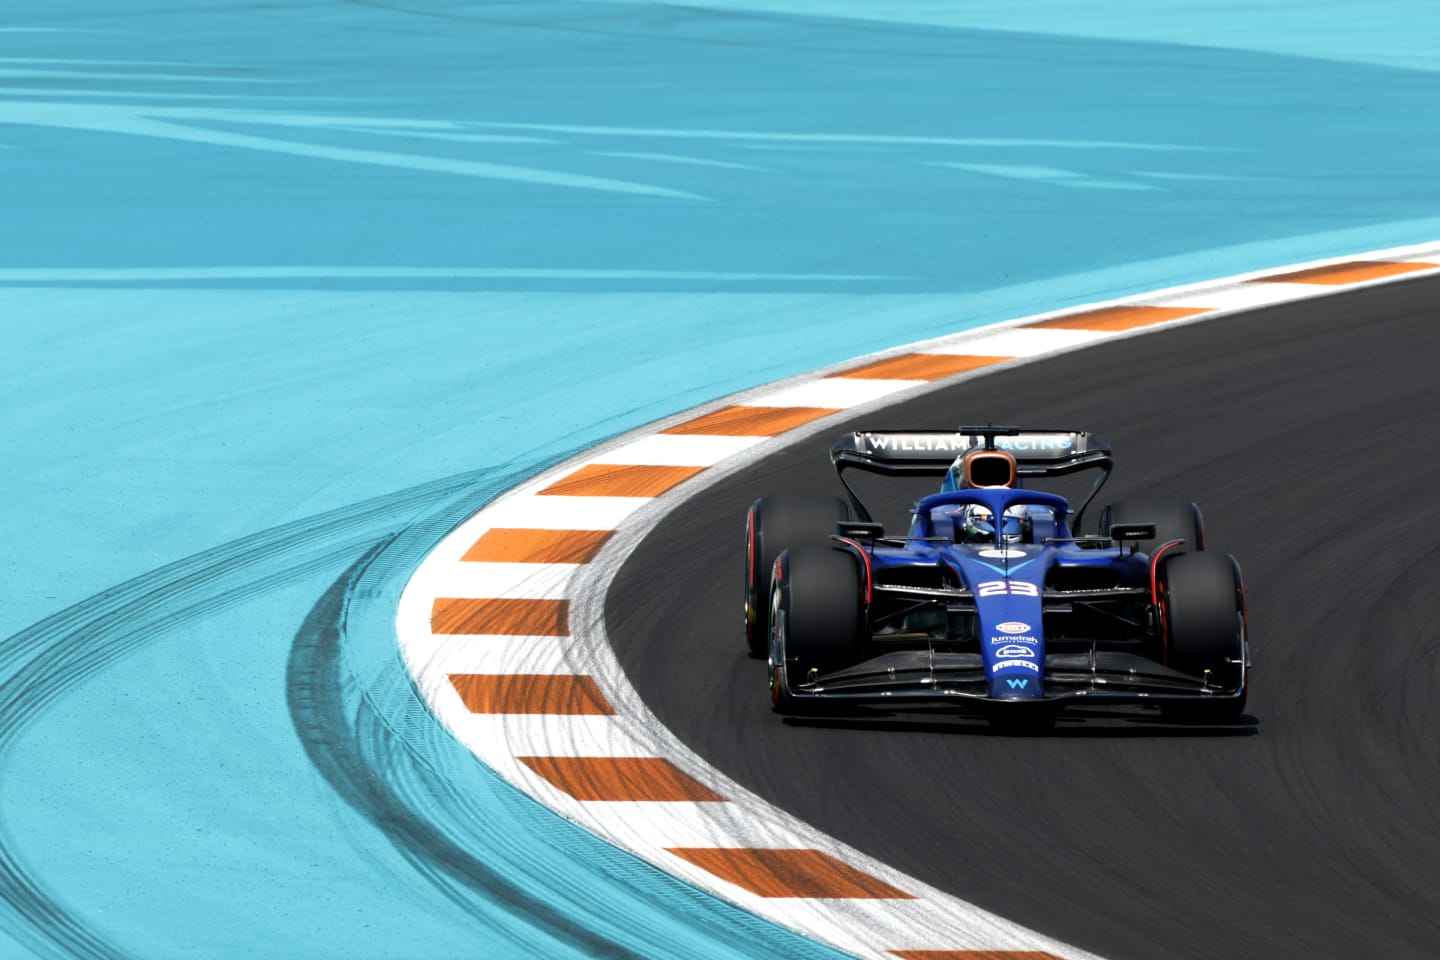 MIAMI, FLORIDA - MAY 05:  Alexander Albon of Thailand driving the (23) Williams FW45 Mercedeson track during practice ahead of the F1 Grand Prix of Miami at Miami International Autodrome on May 05, 2023 in Miami, Florida. (Photo by Chris Graythen/Getty Images)